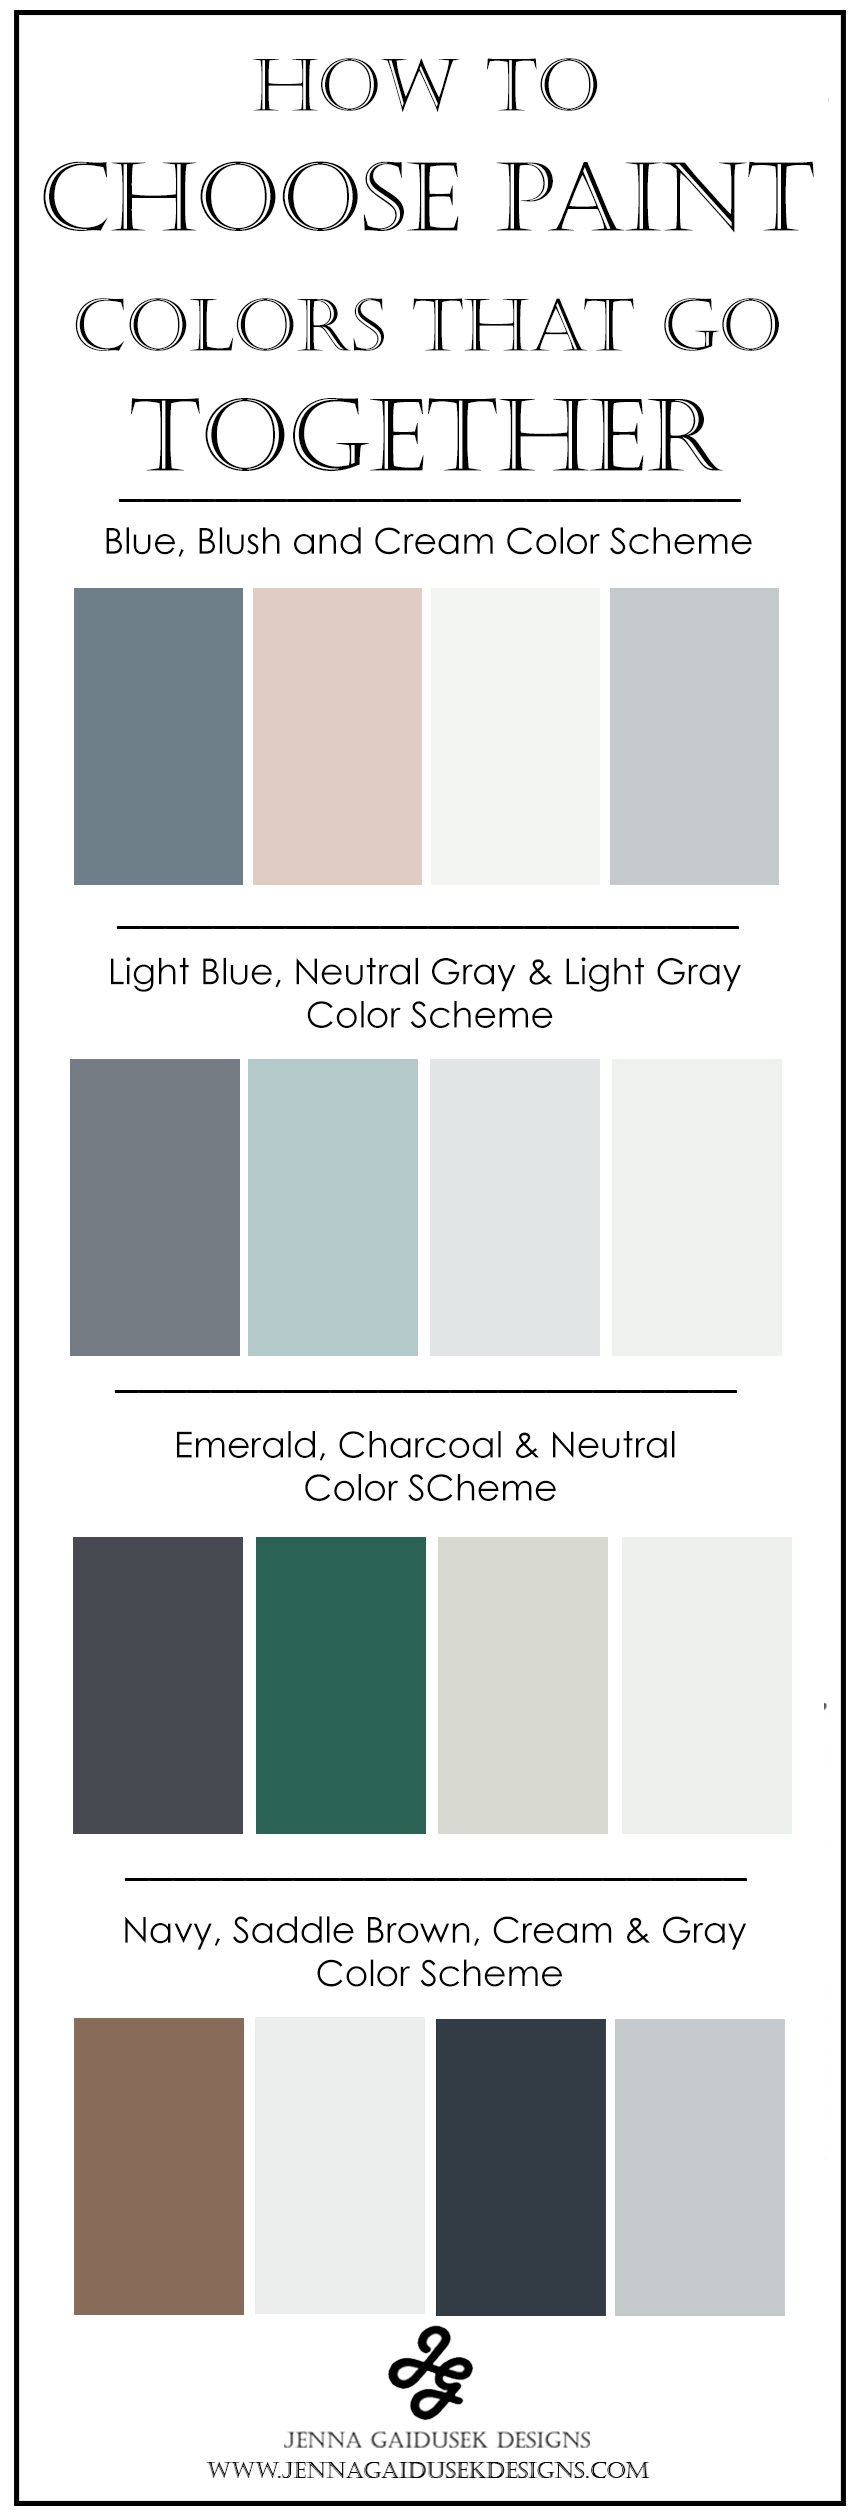 How To Choose Paint Colors That Go Together Jenna Gaidusek Designs,Best Artificial Christmas Tree 2020